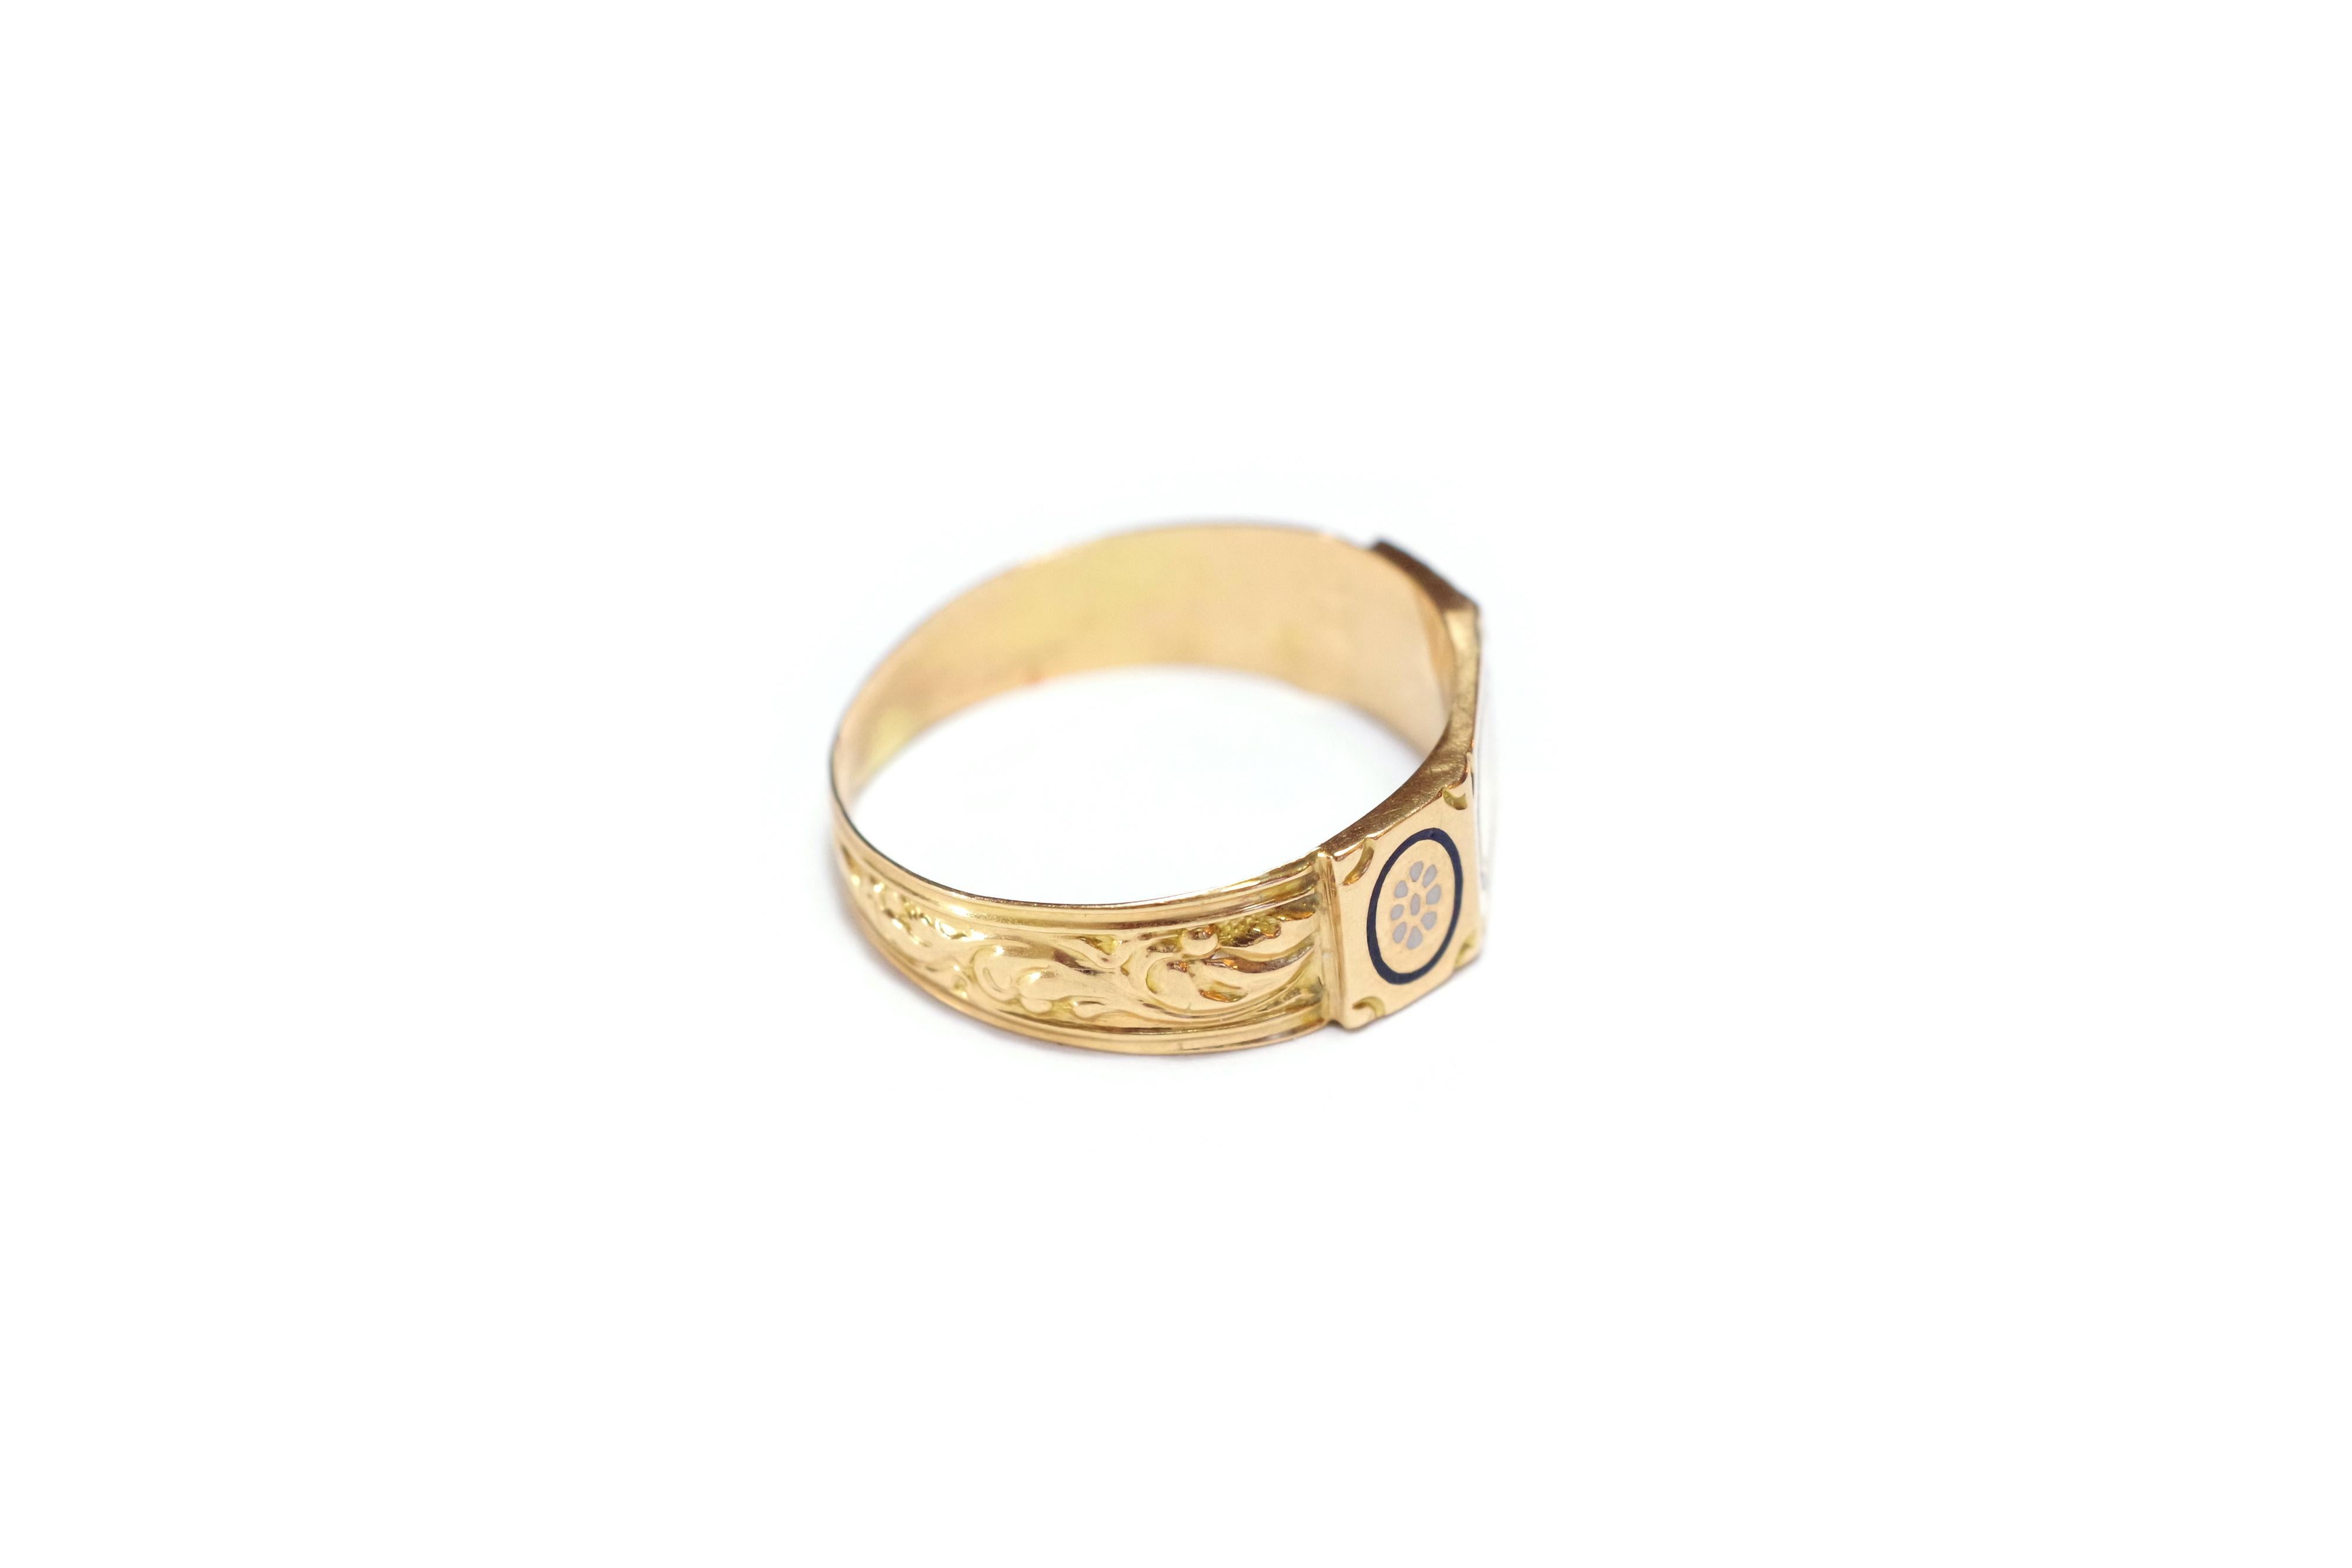 Victorian antique French wedding ring in 18 karat yellow and rose gold. The ring has three facets: the sides are decorated with cartouches with white enamelled flowers surrounded by a blue border on a golden background. In the centre, a blank